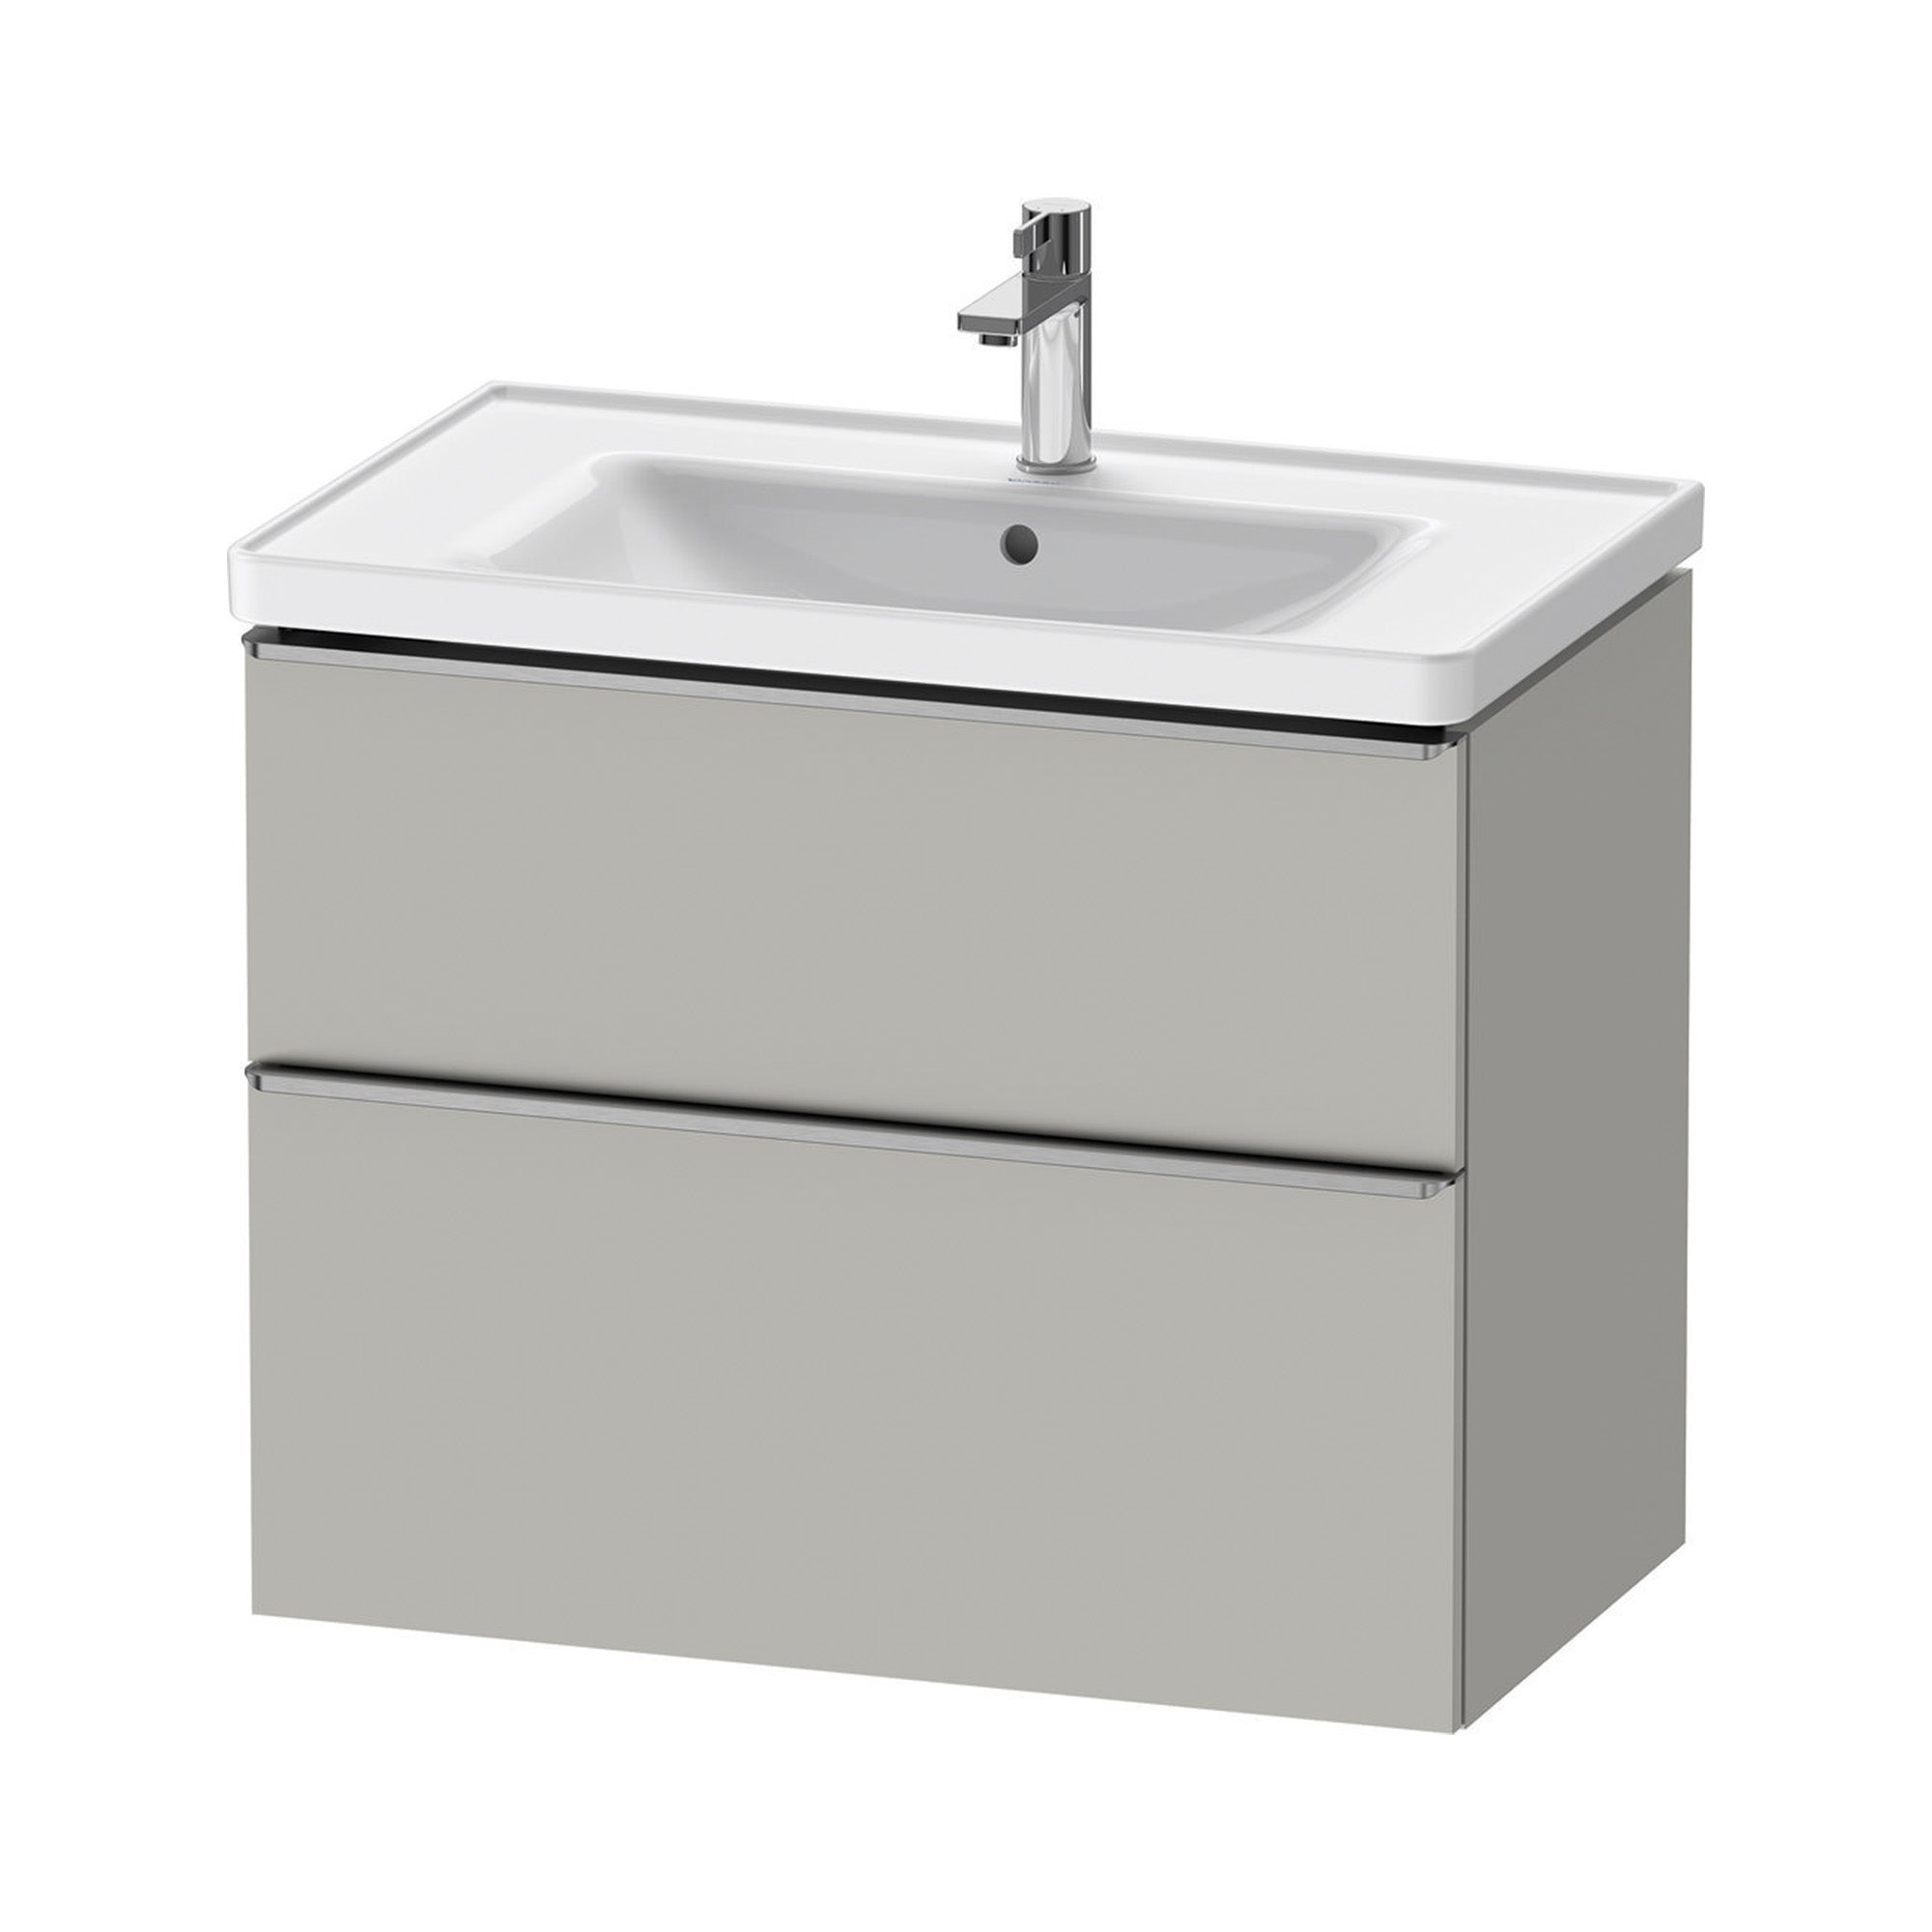 duravit d-neo 800mm wall mounted vanity unit with d-neo basin concrete grey stainless steel handles